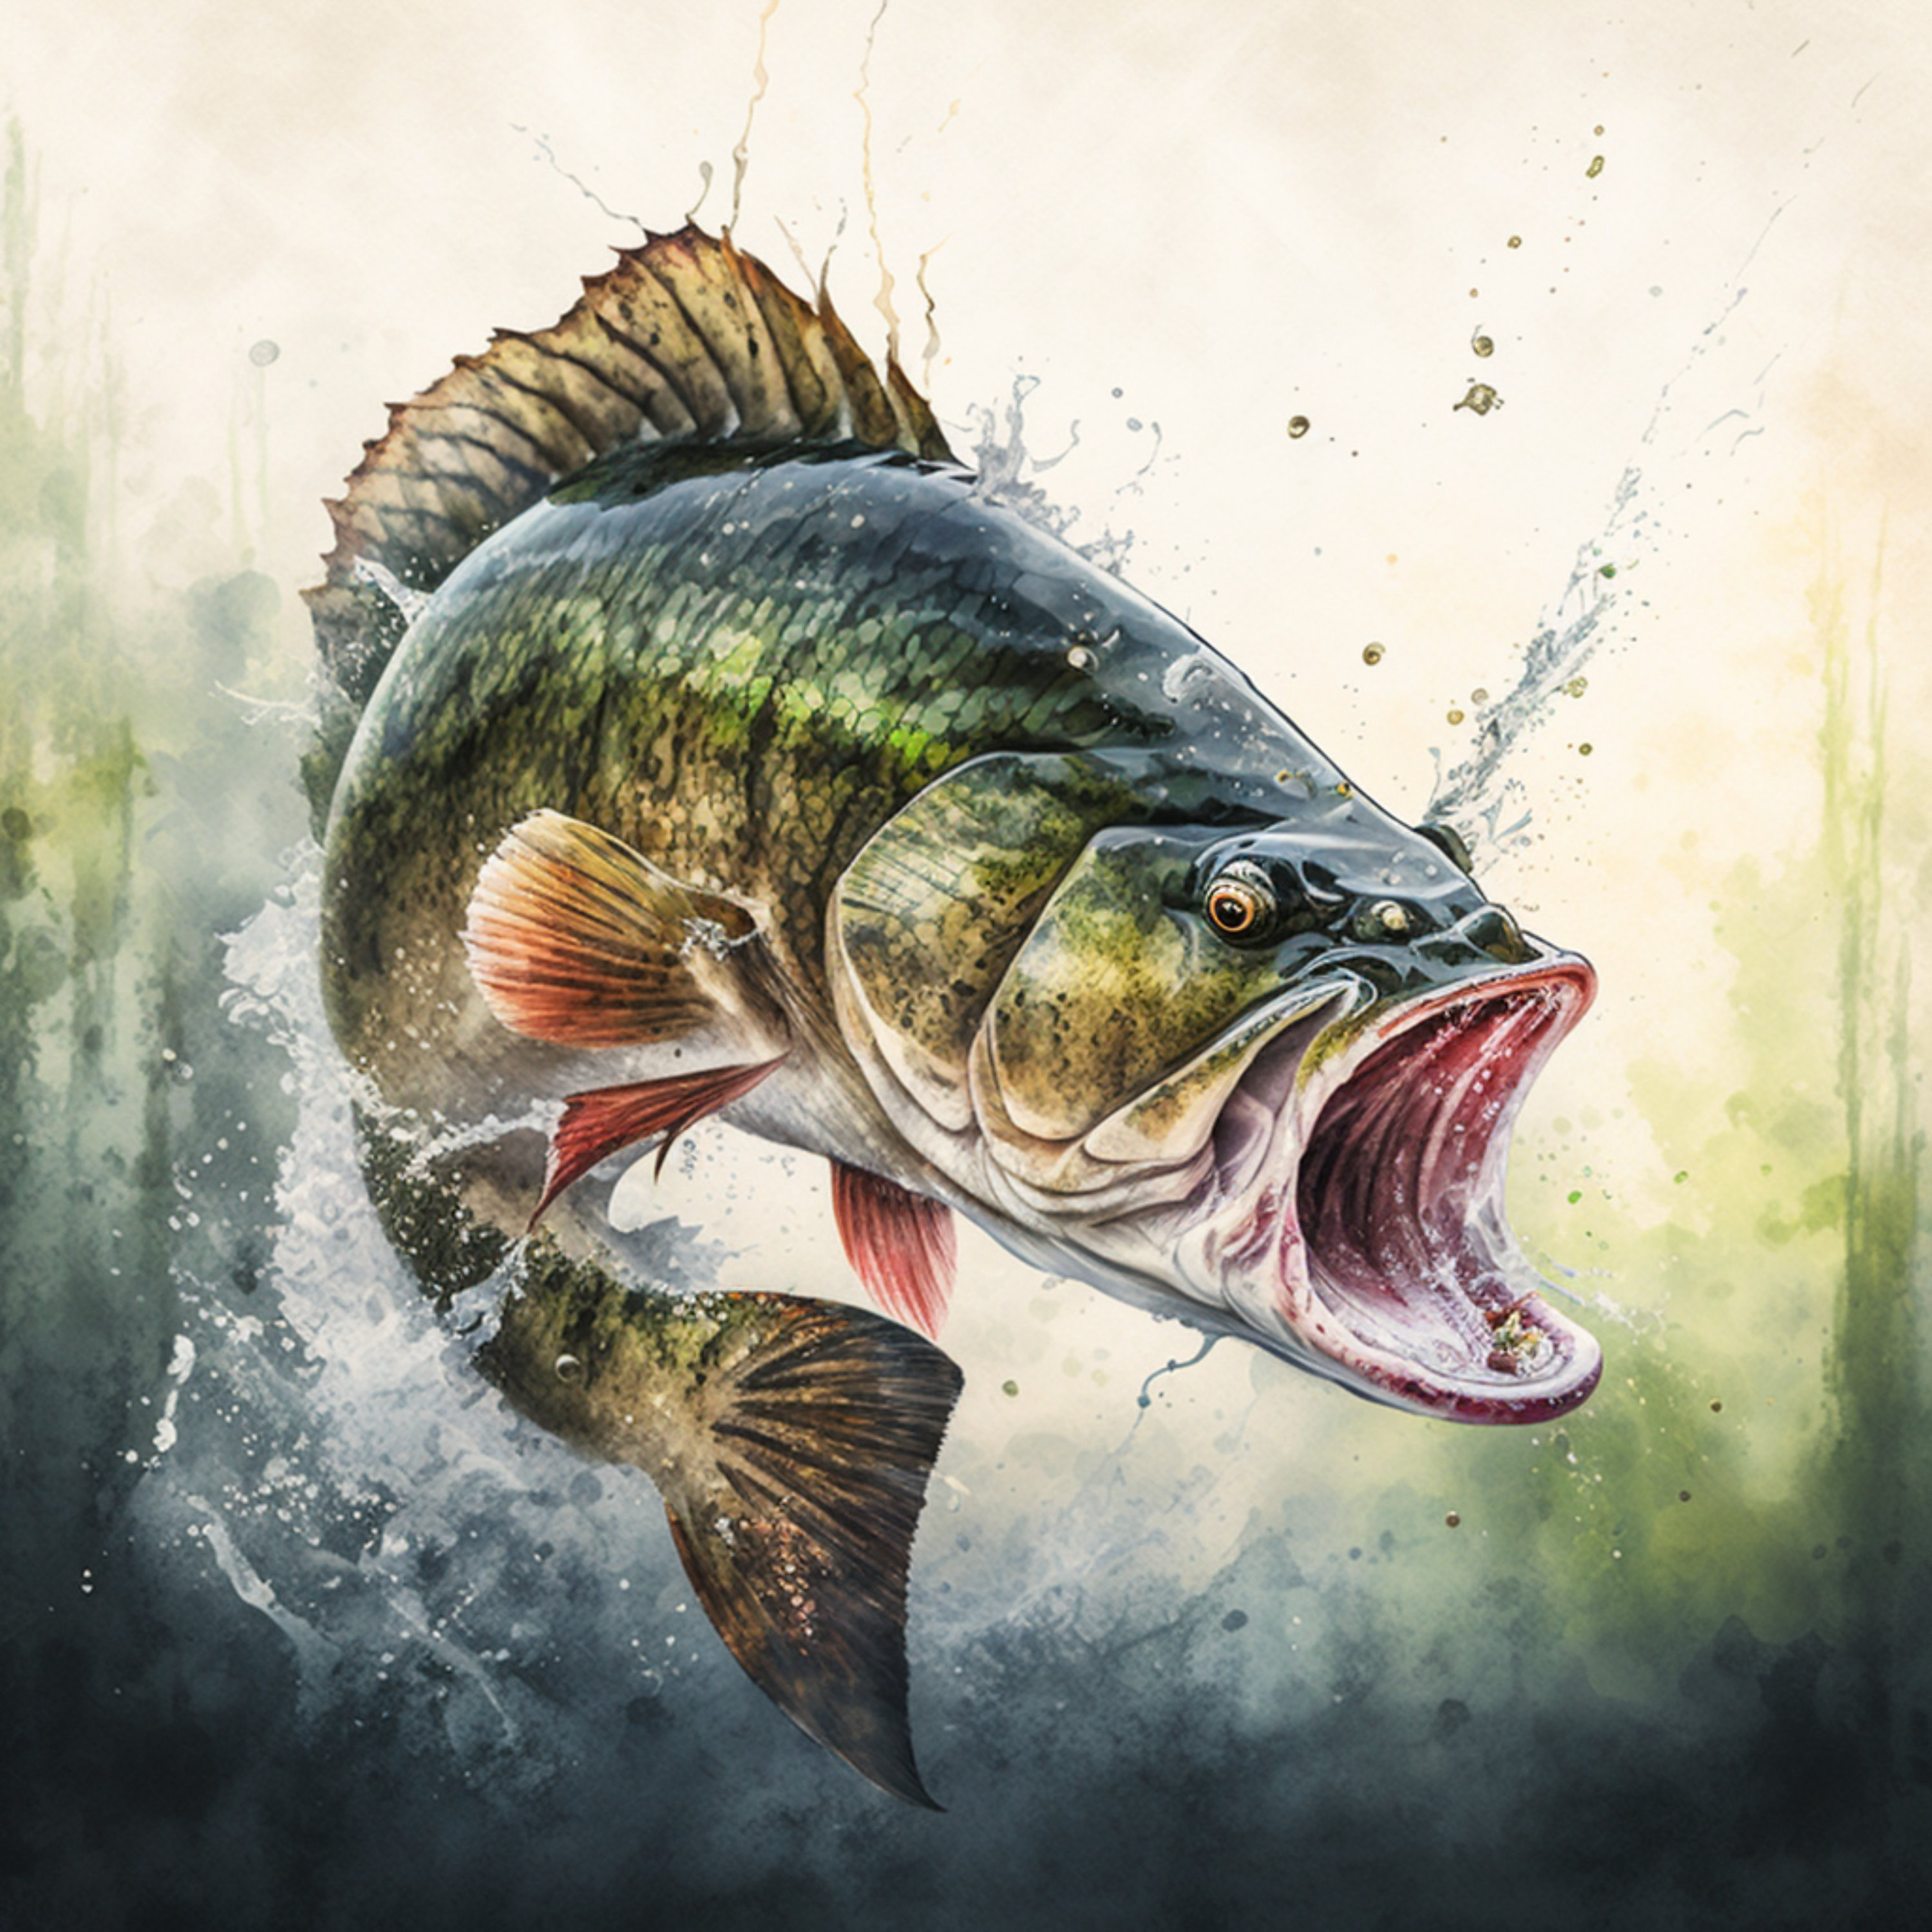 Large Mouth Bass Jumping Out Of The Water-Watercolor Digital Art Print